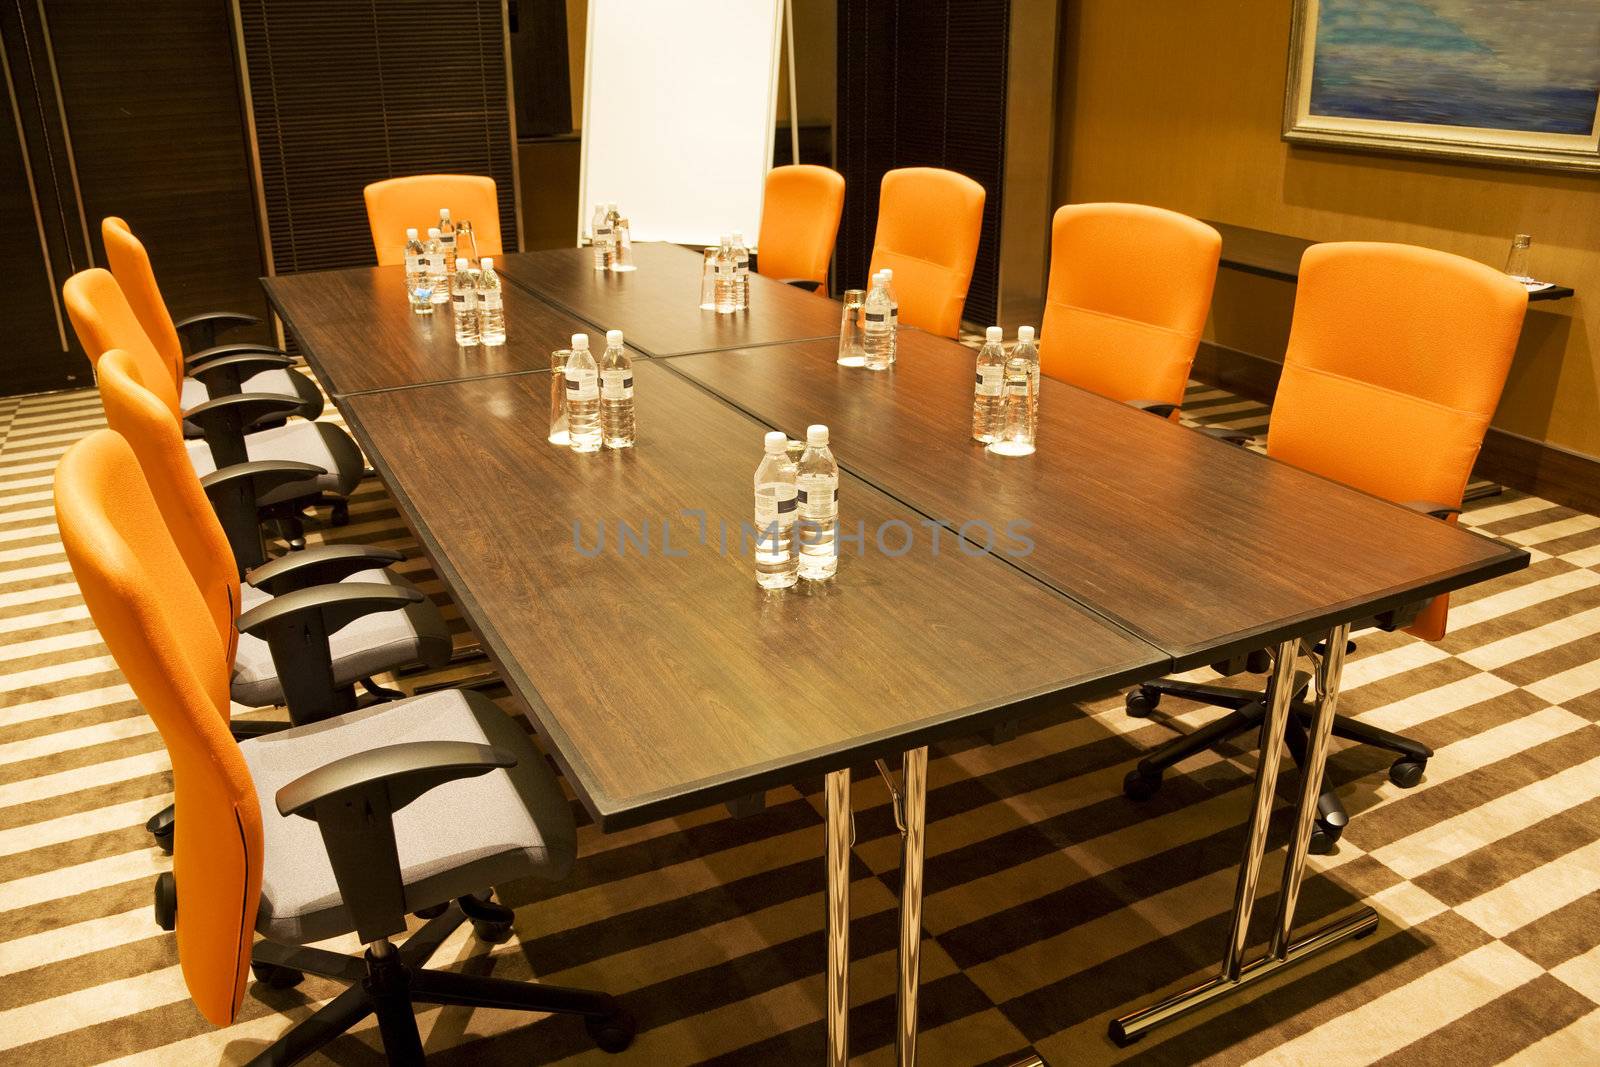 Image of a modern meeting room.
